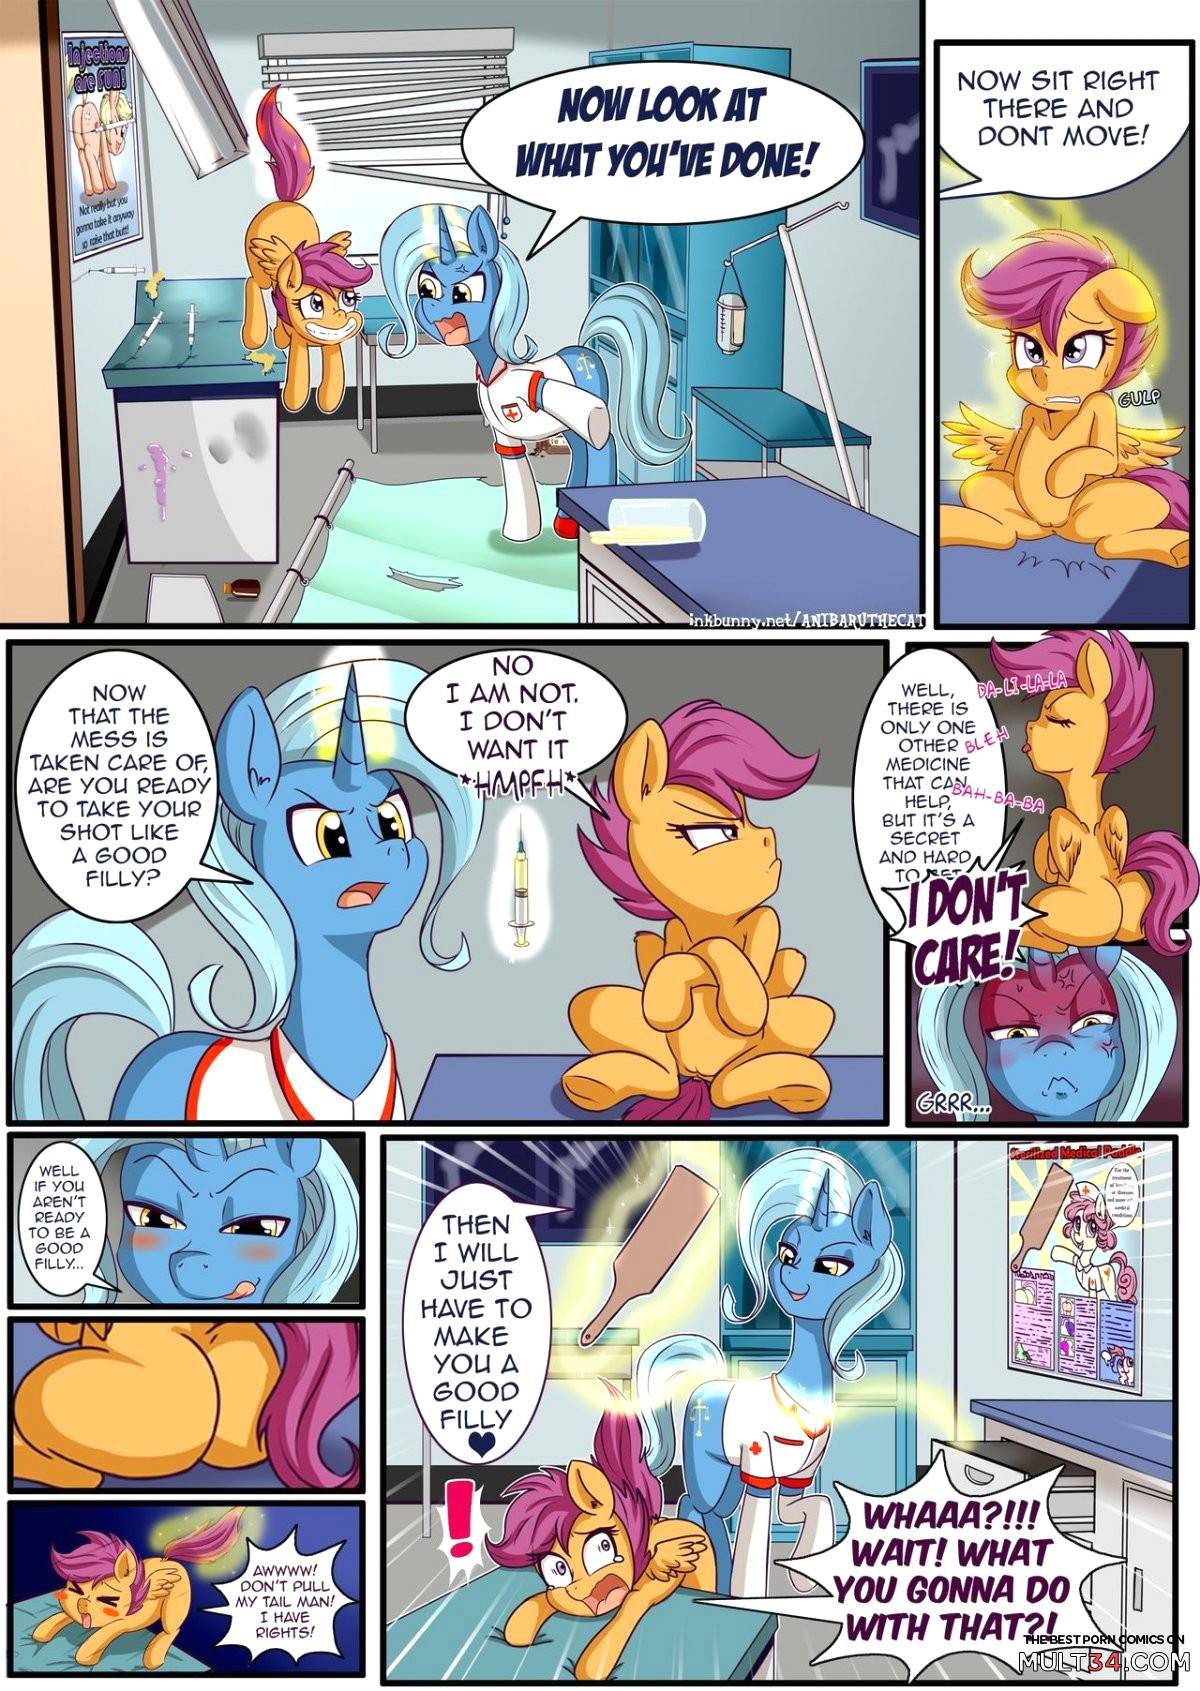 Cutie mark check up 2 page 5